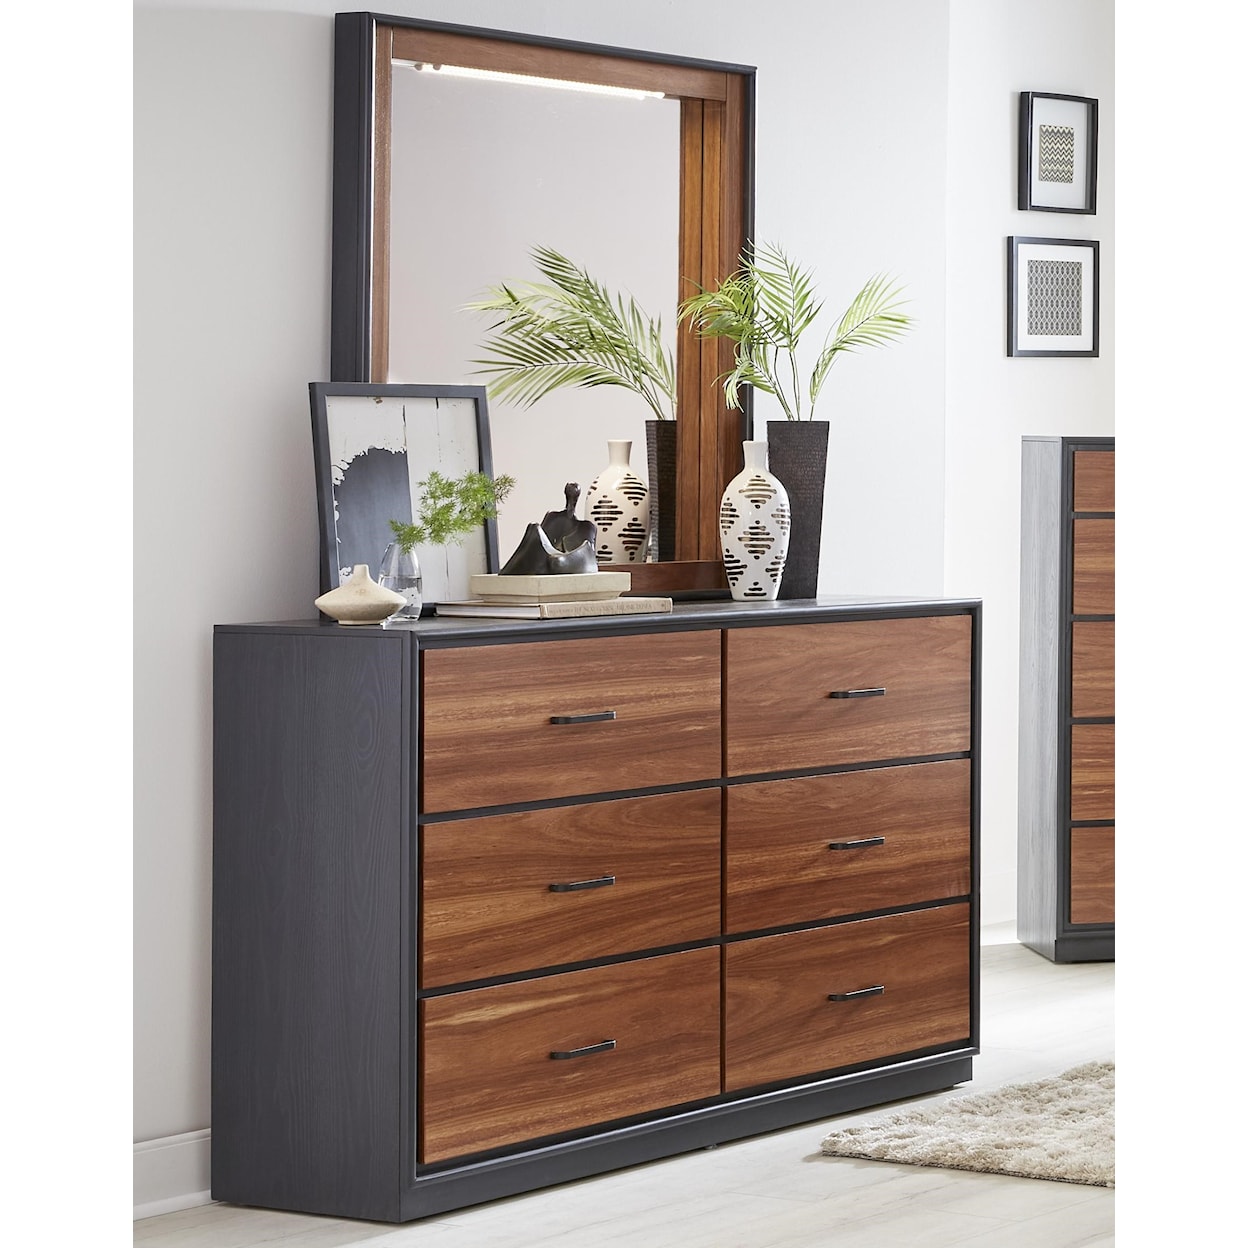 Lifestyle Madison King 5 Pc Bedroom Group